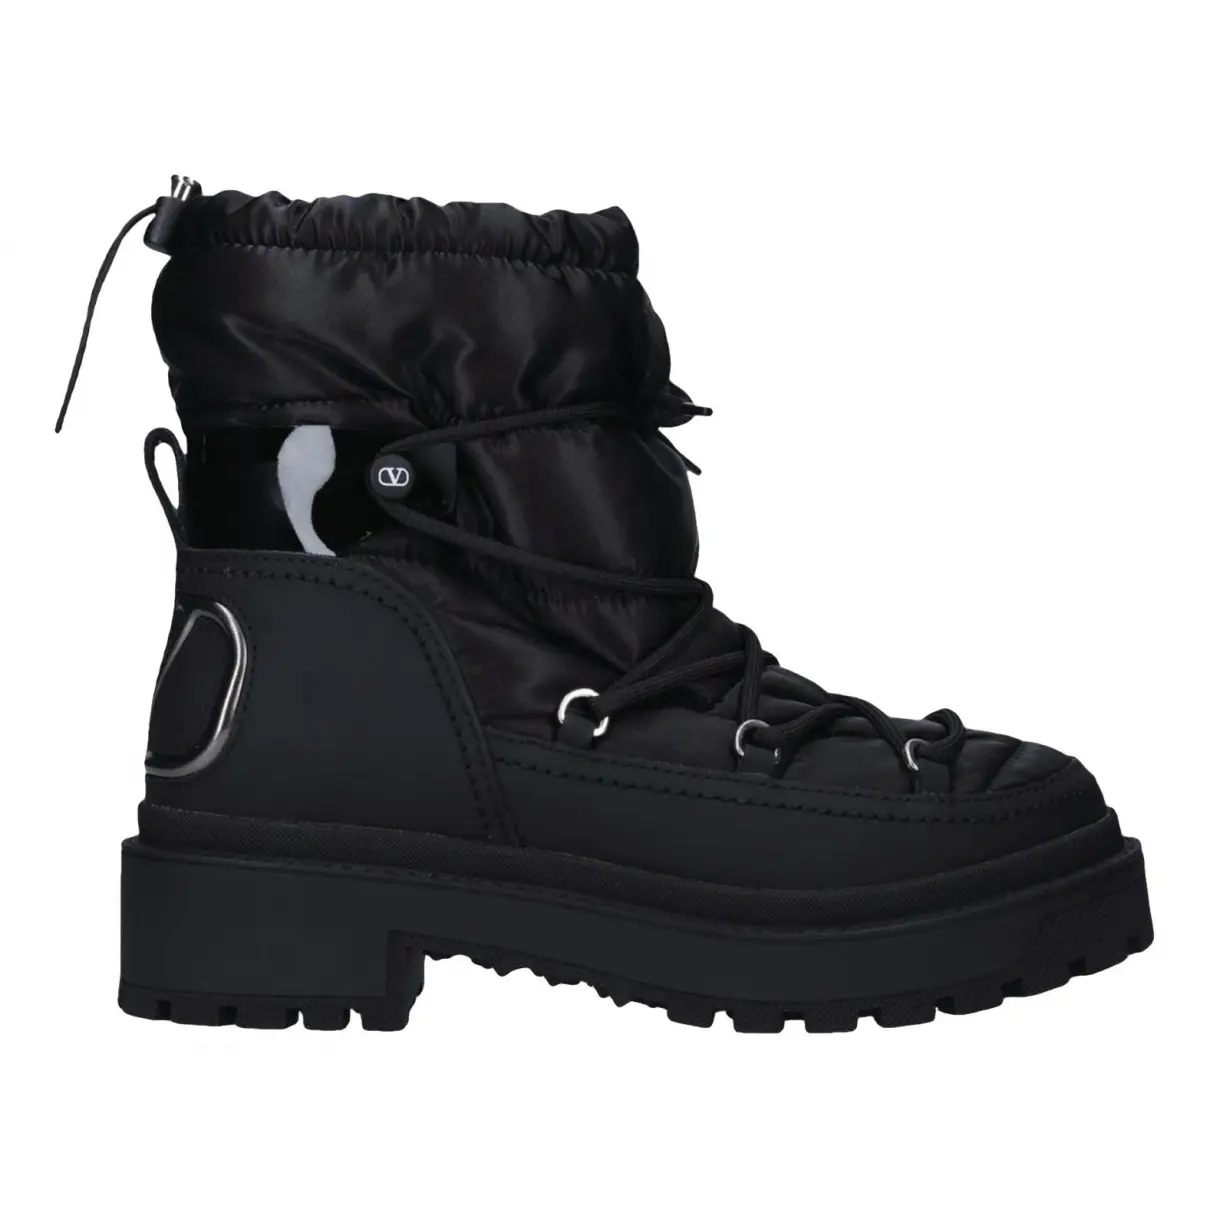 VLogo leather snow boots